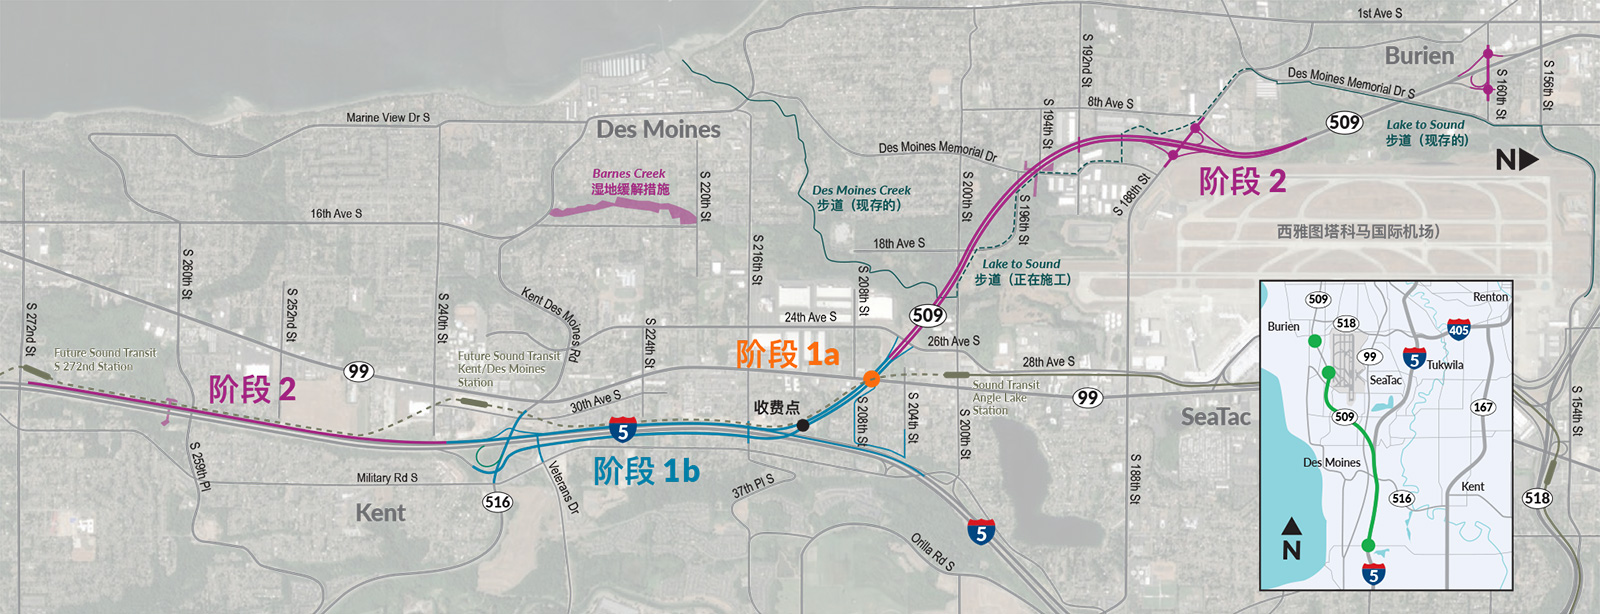 Map of SR 509 Completion Project broken out by project stage, all labels in Chinese (Simplified).
